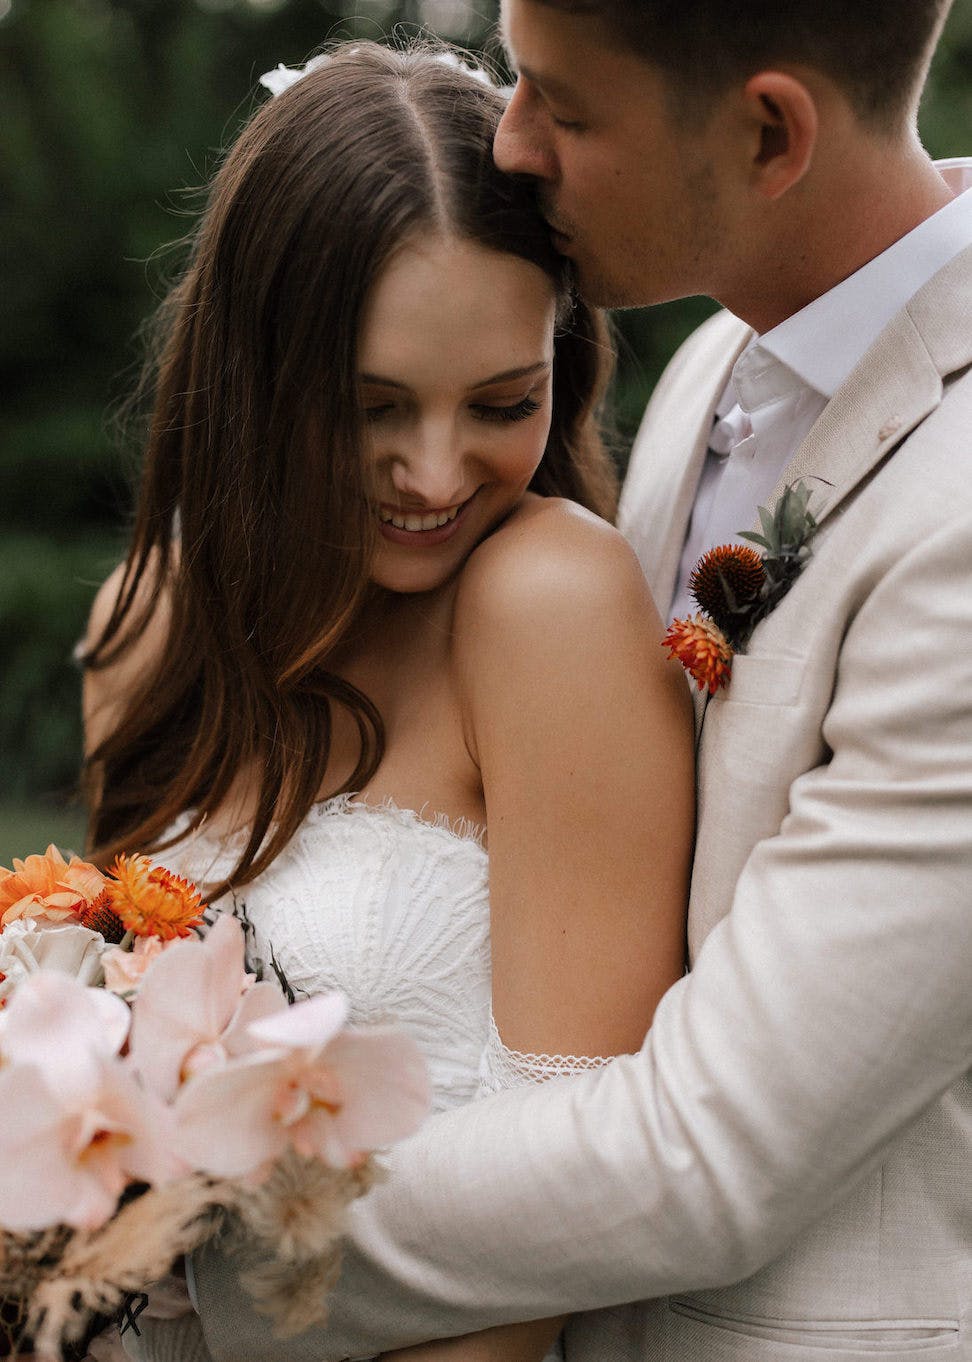 A groom in a light beige suit tenderly kisses the forehead of his smiling bride, who is wearing a strapless white dress and holding a bouquet of flowers with orange accents. They stand closely embraced, surrounded by greenery, radiating happiness and love.